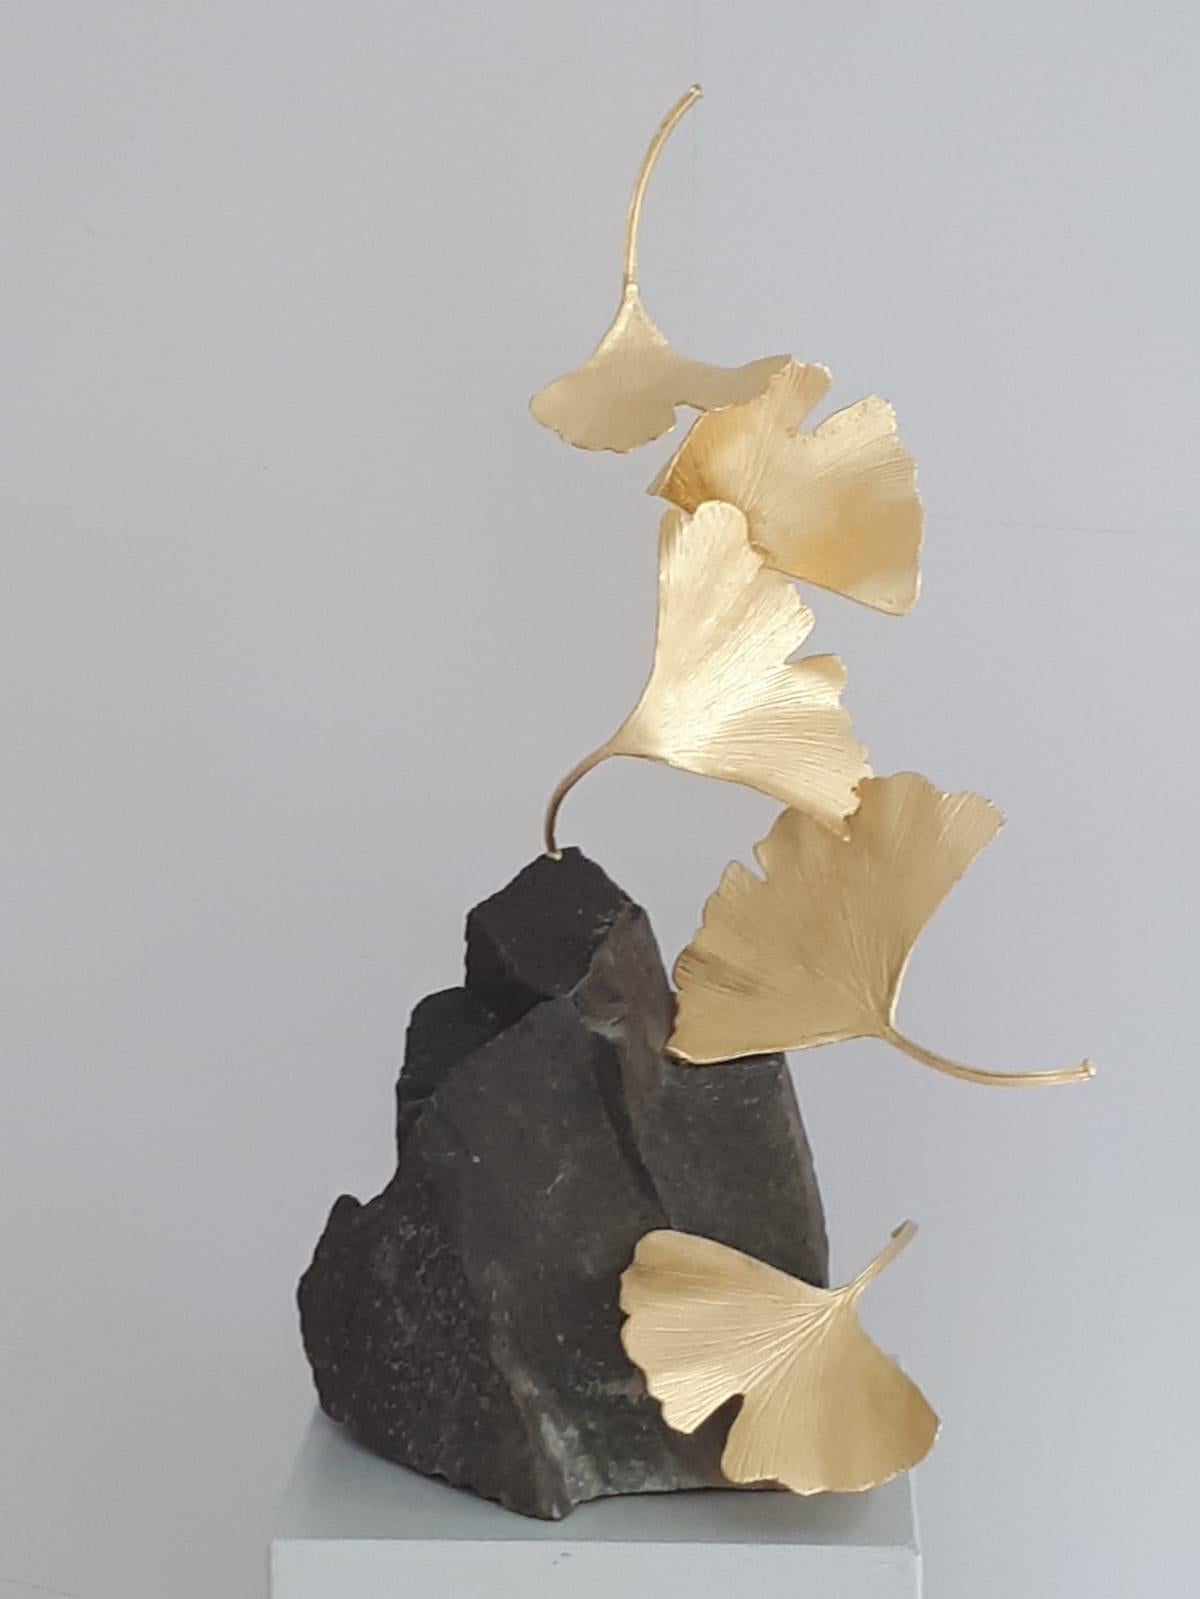 5 Leaf Stone Gingko by Kuno Vollet - Gilded Brass Gingko sculpture on stone base